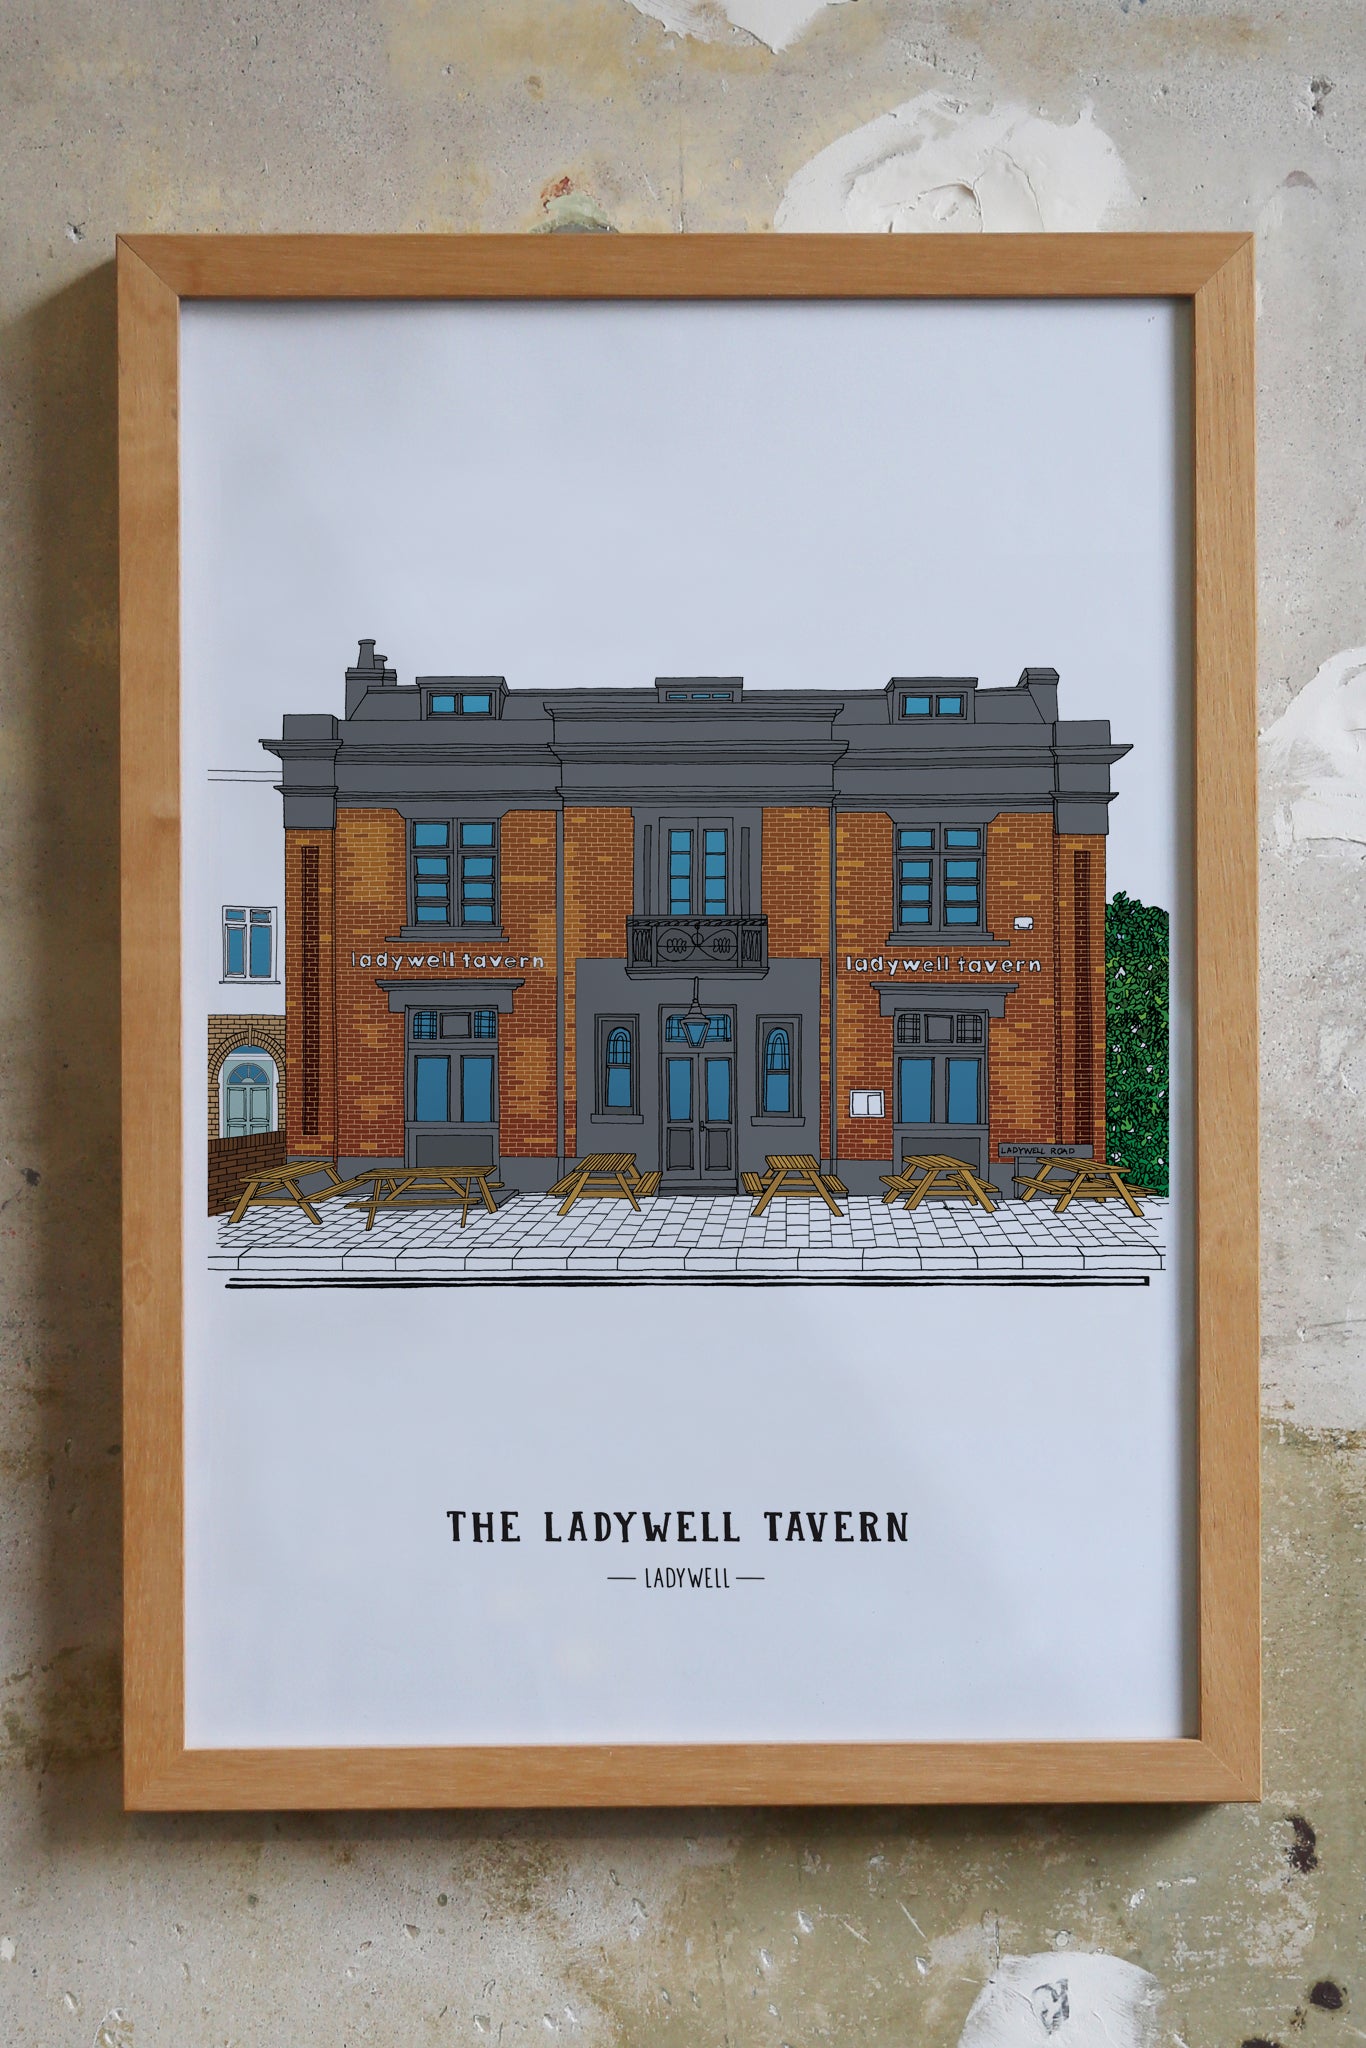 The Ladywell Tavern